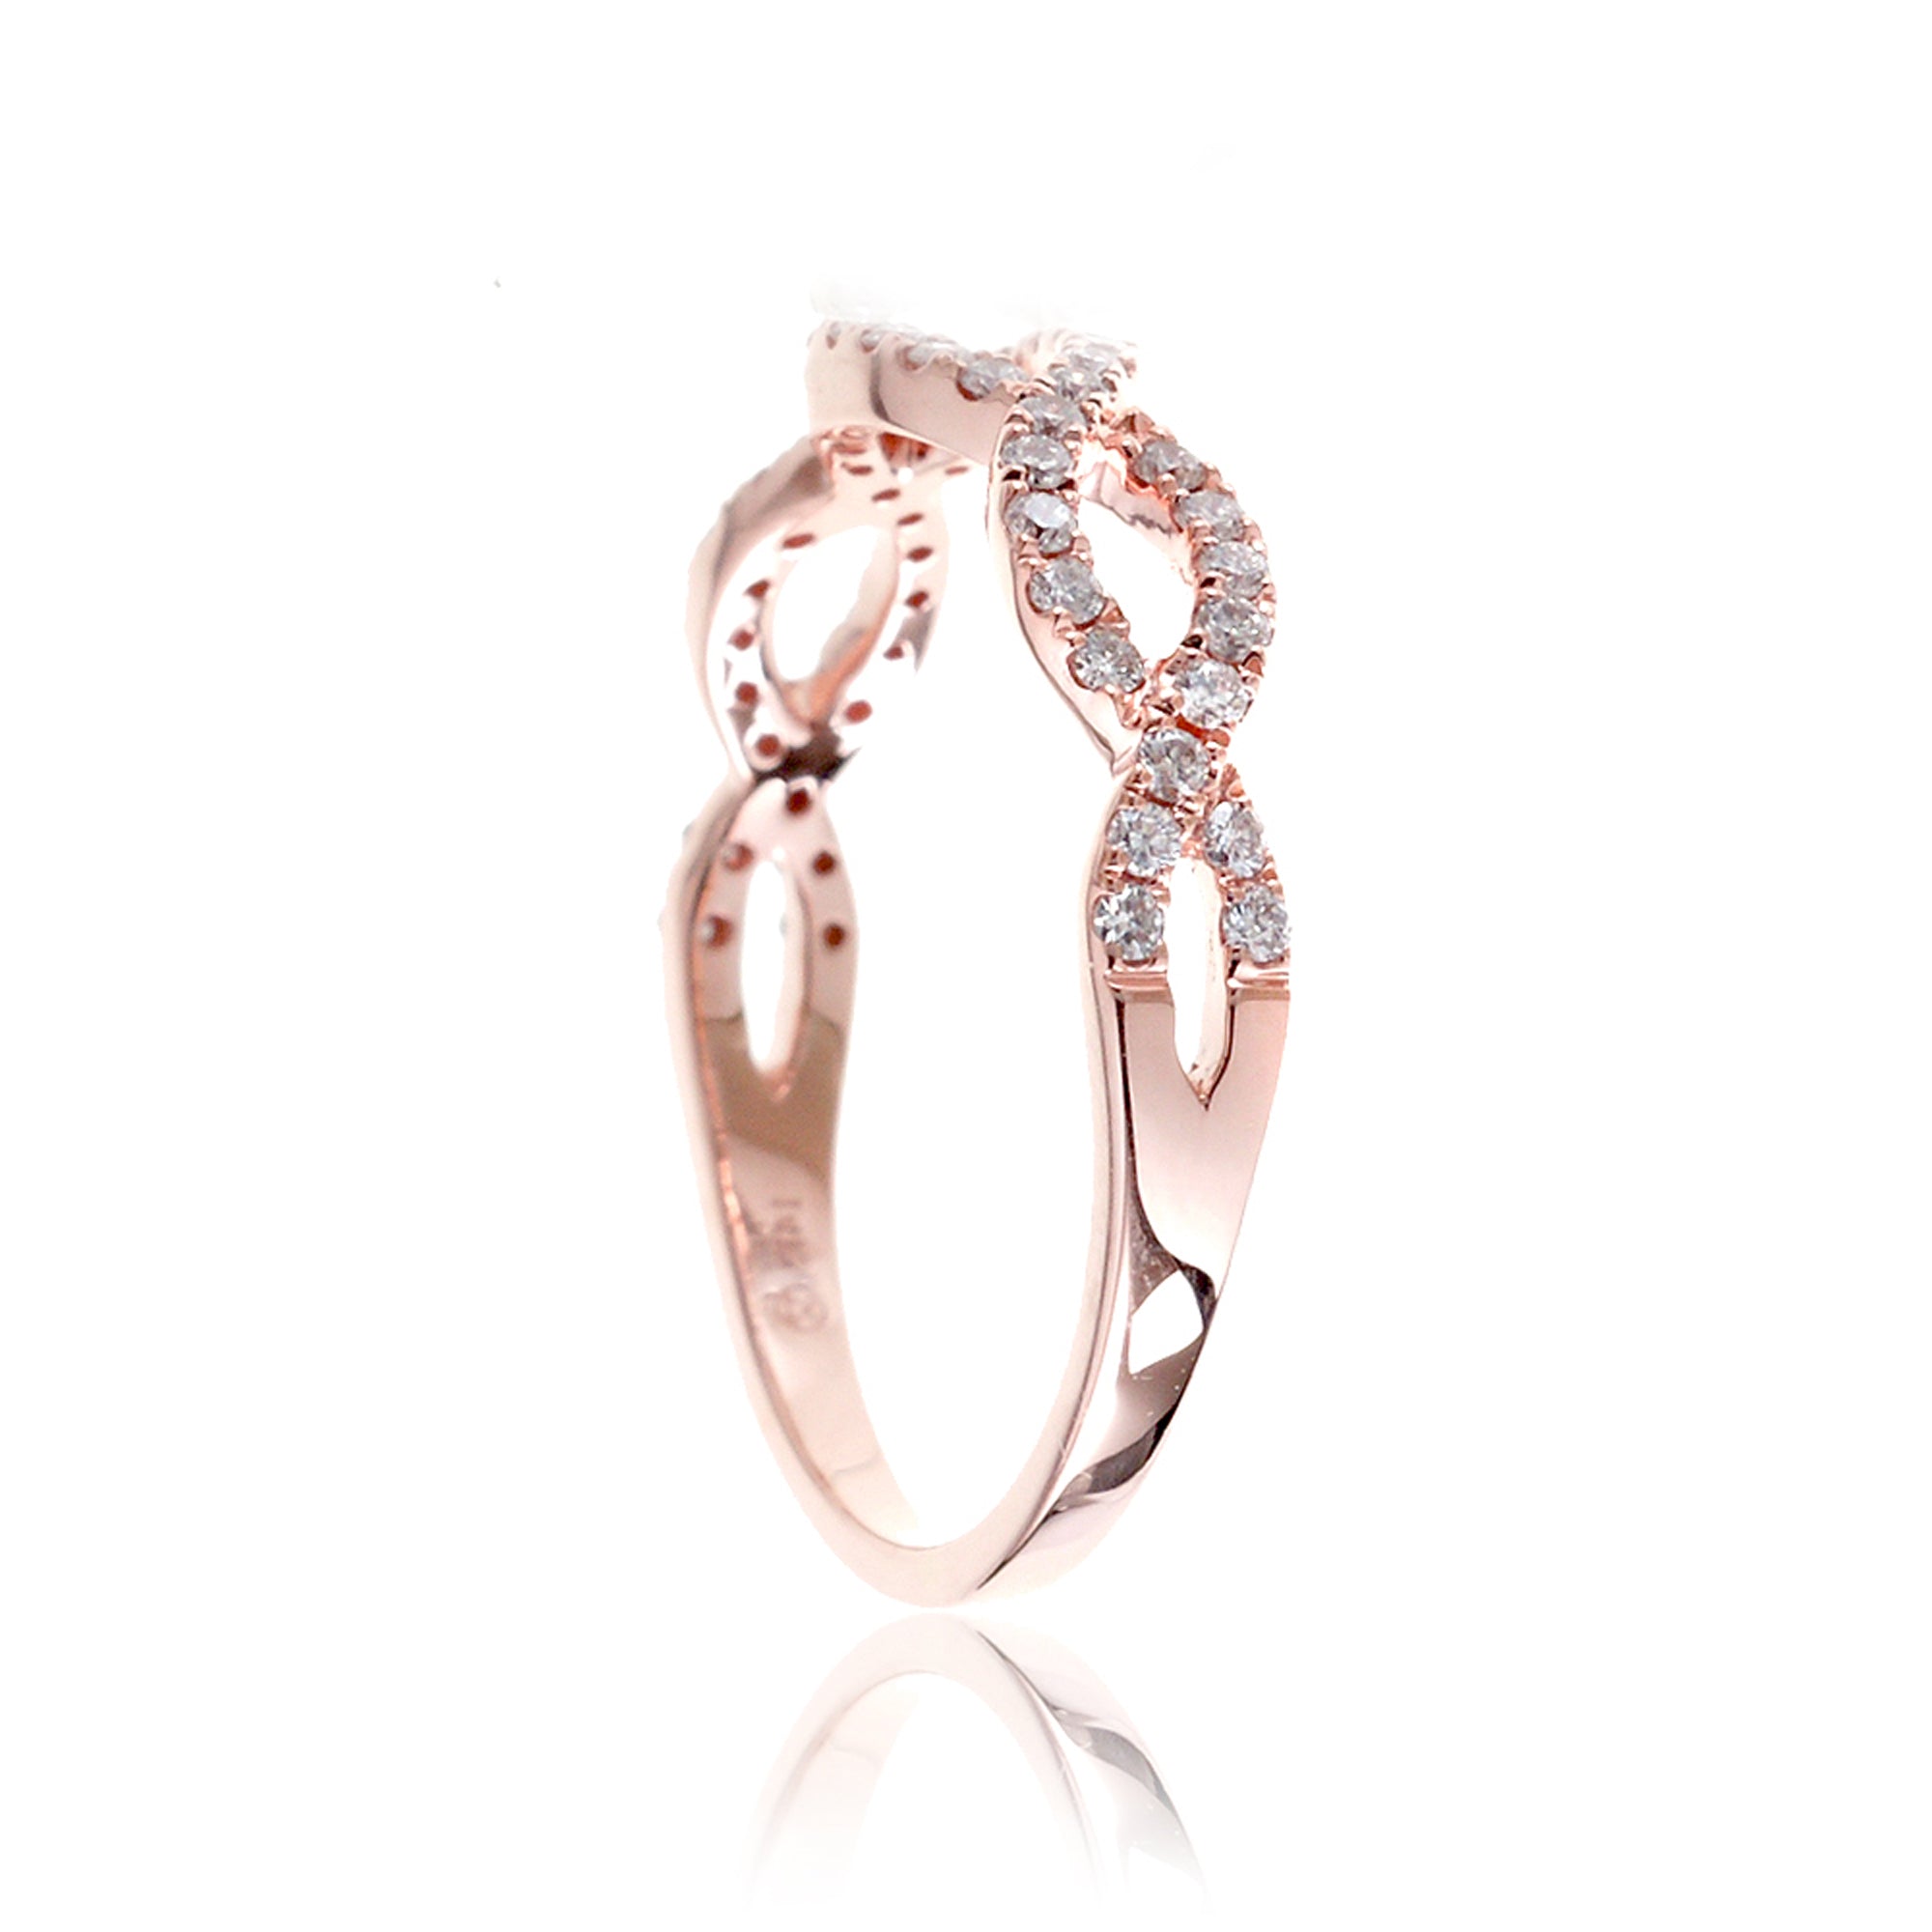 Twisted infinity diamond wedding band the Rosy rose gold